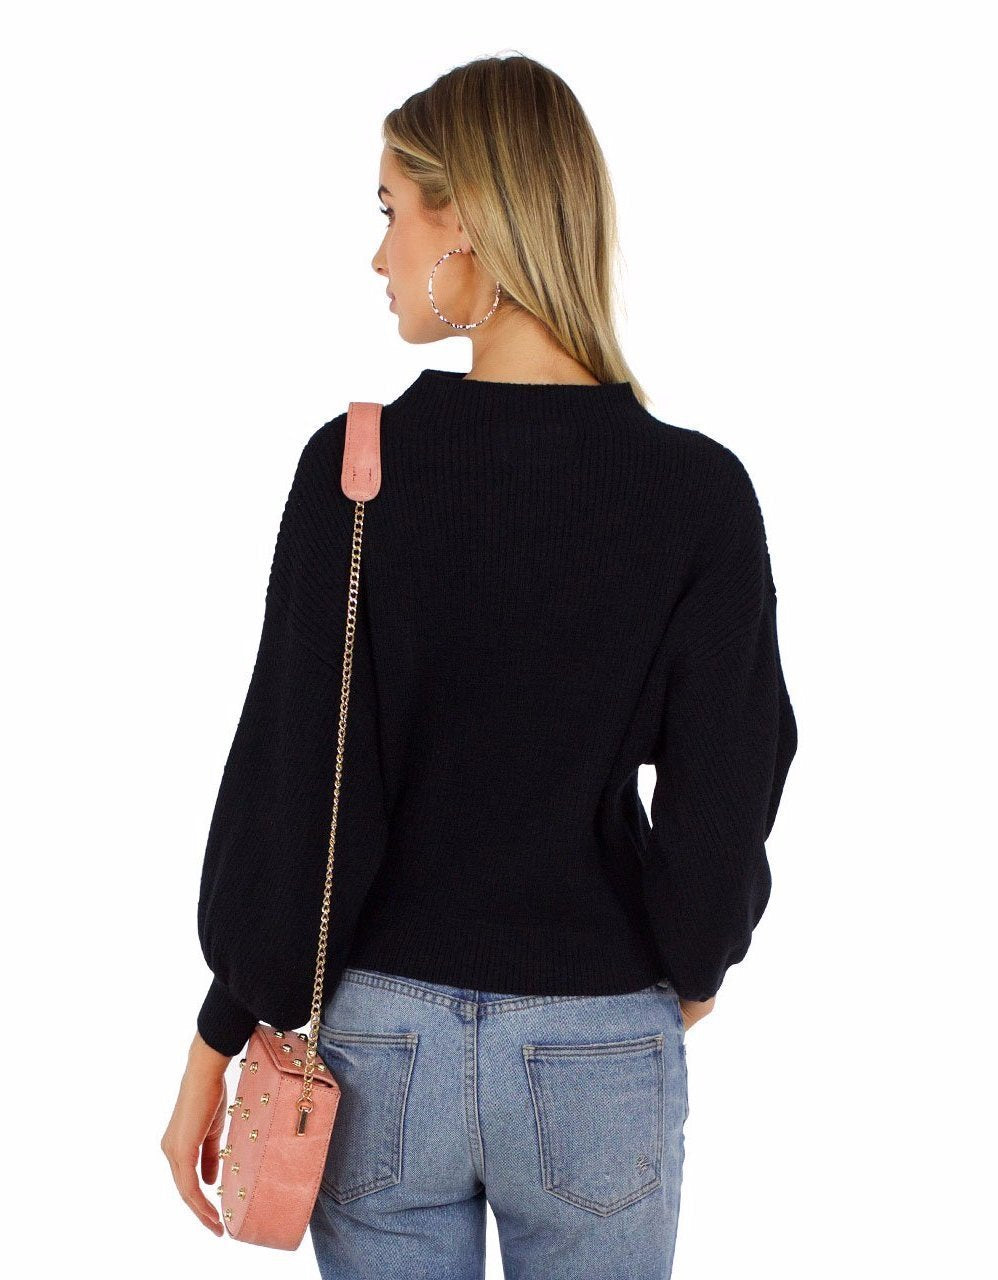 Women wearing a top rental from Line & Dot called Balloon Sleeve Pullover Sweater